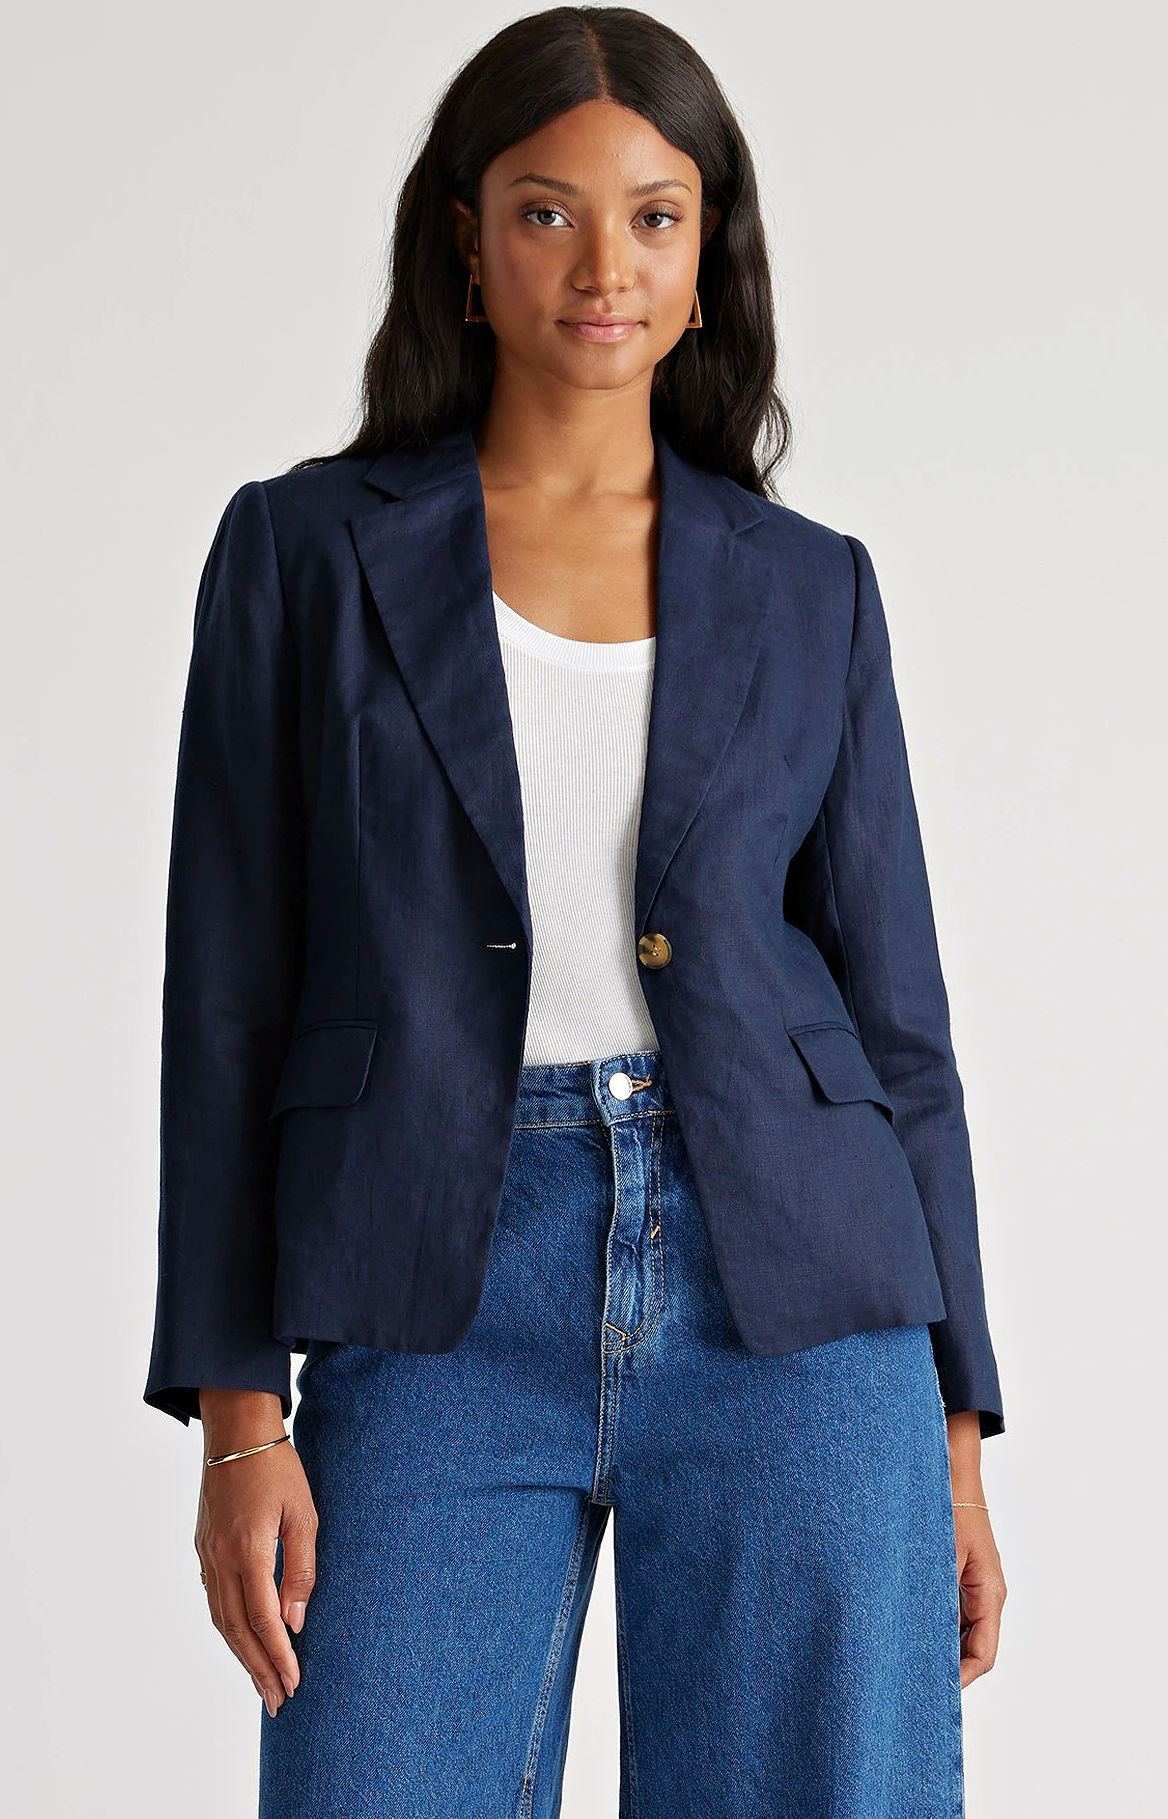 What’s the Best Linen Blazer for Travel? 12 Cute and Airy Picks